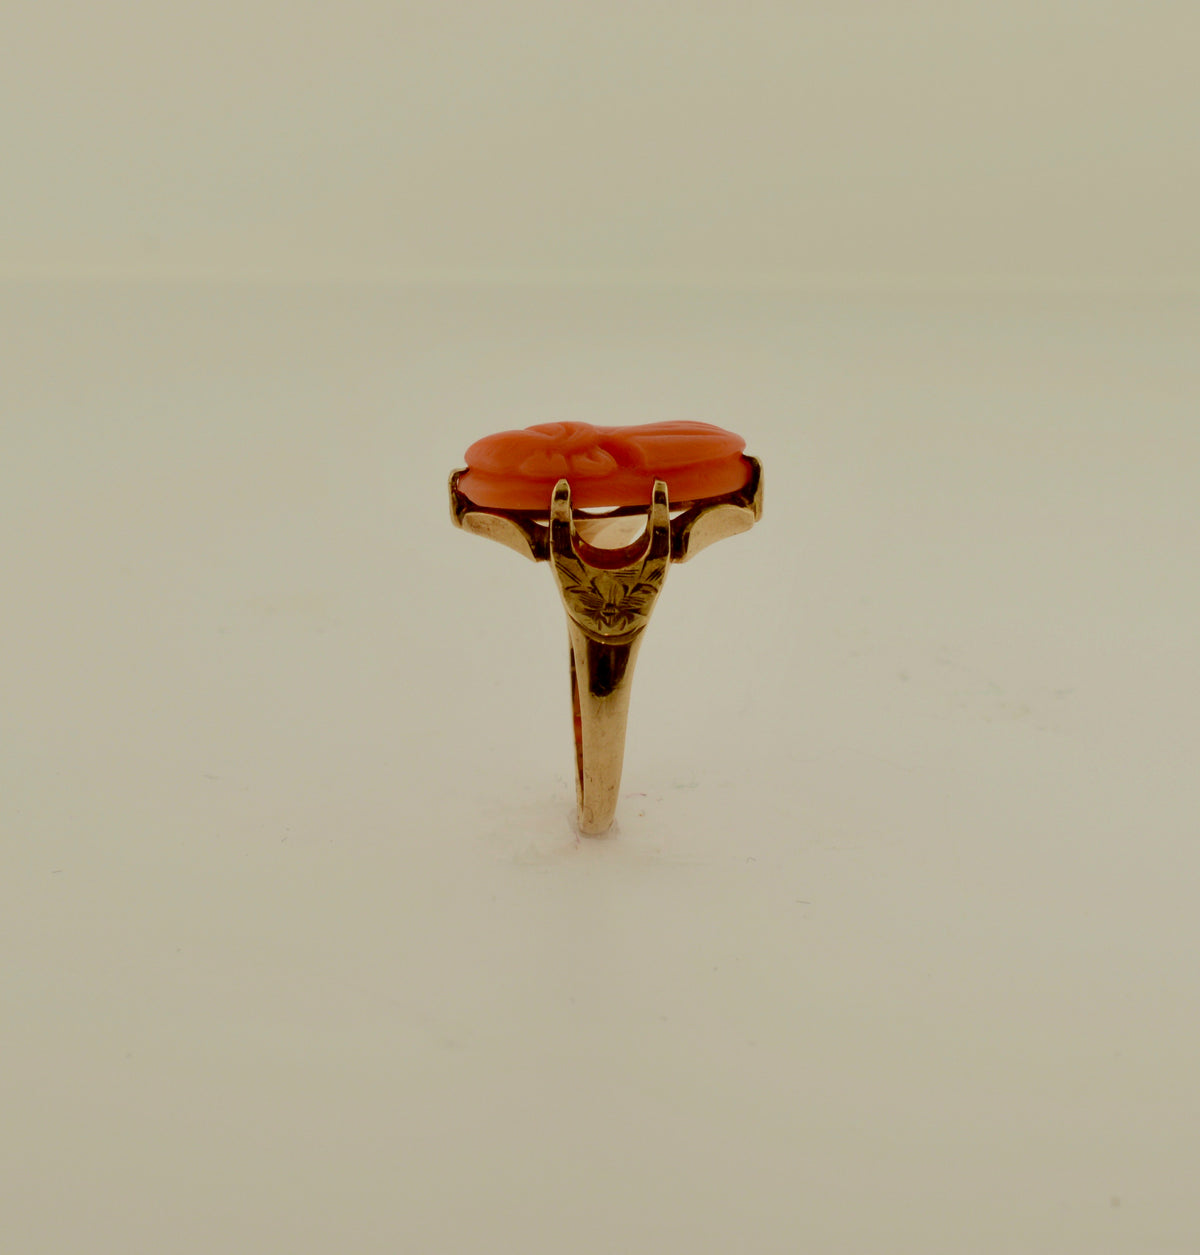 Oval Cameo Gold Ring Engraved 7-8-16 inside of the shank